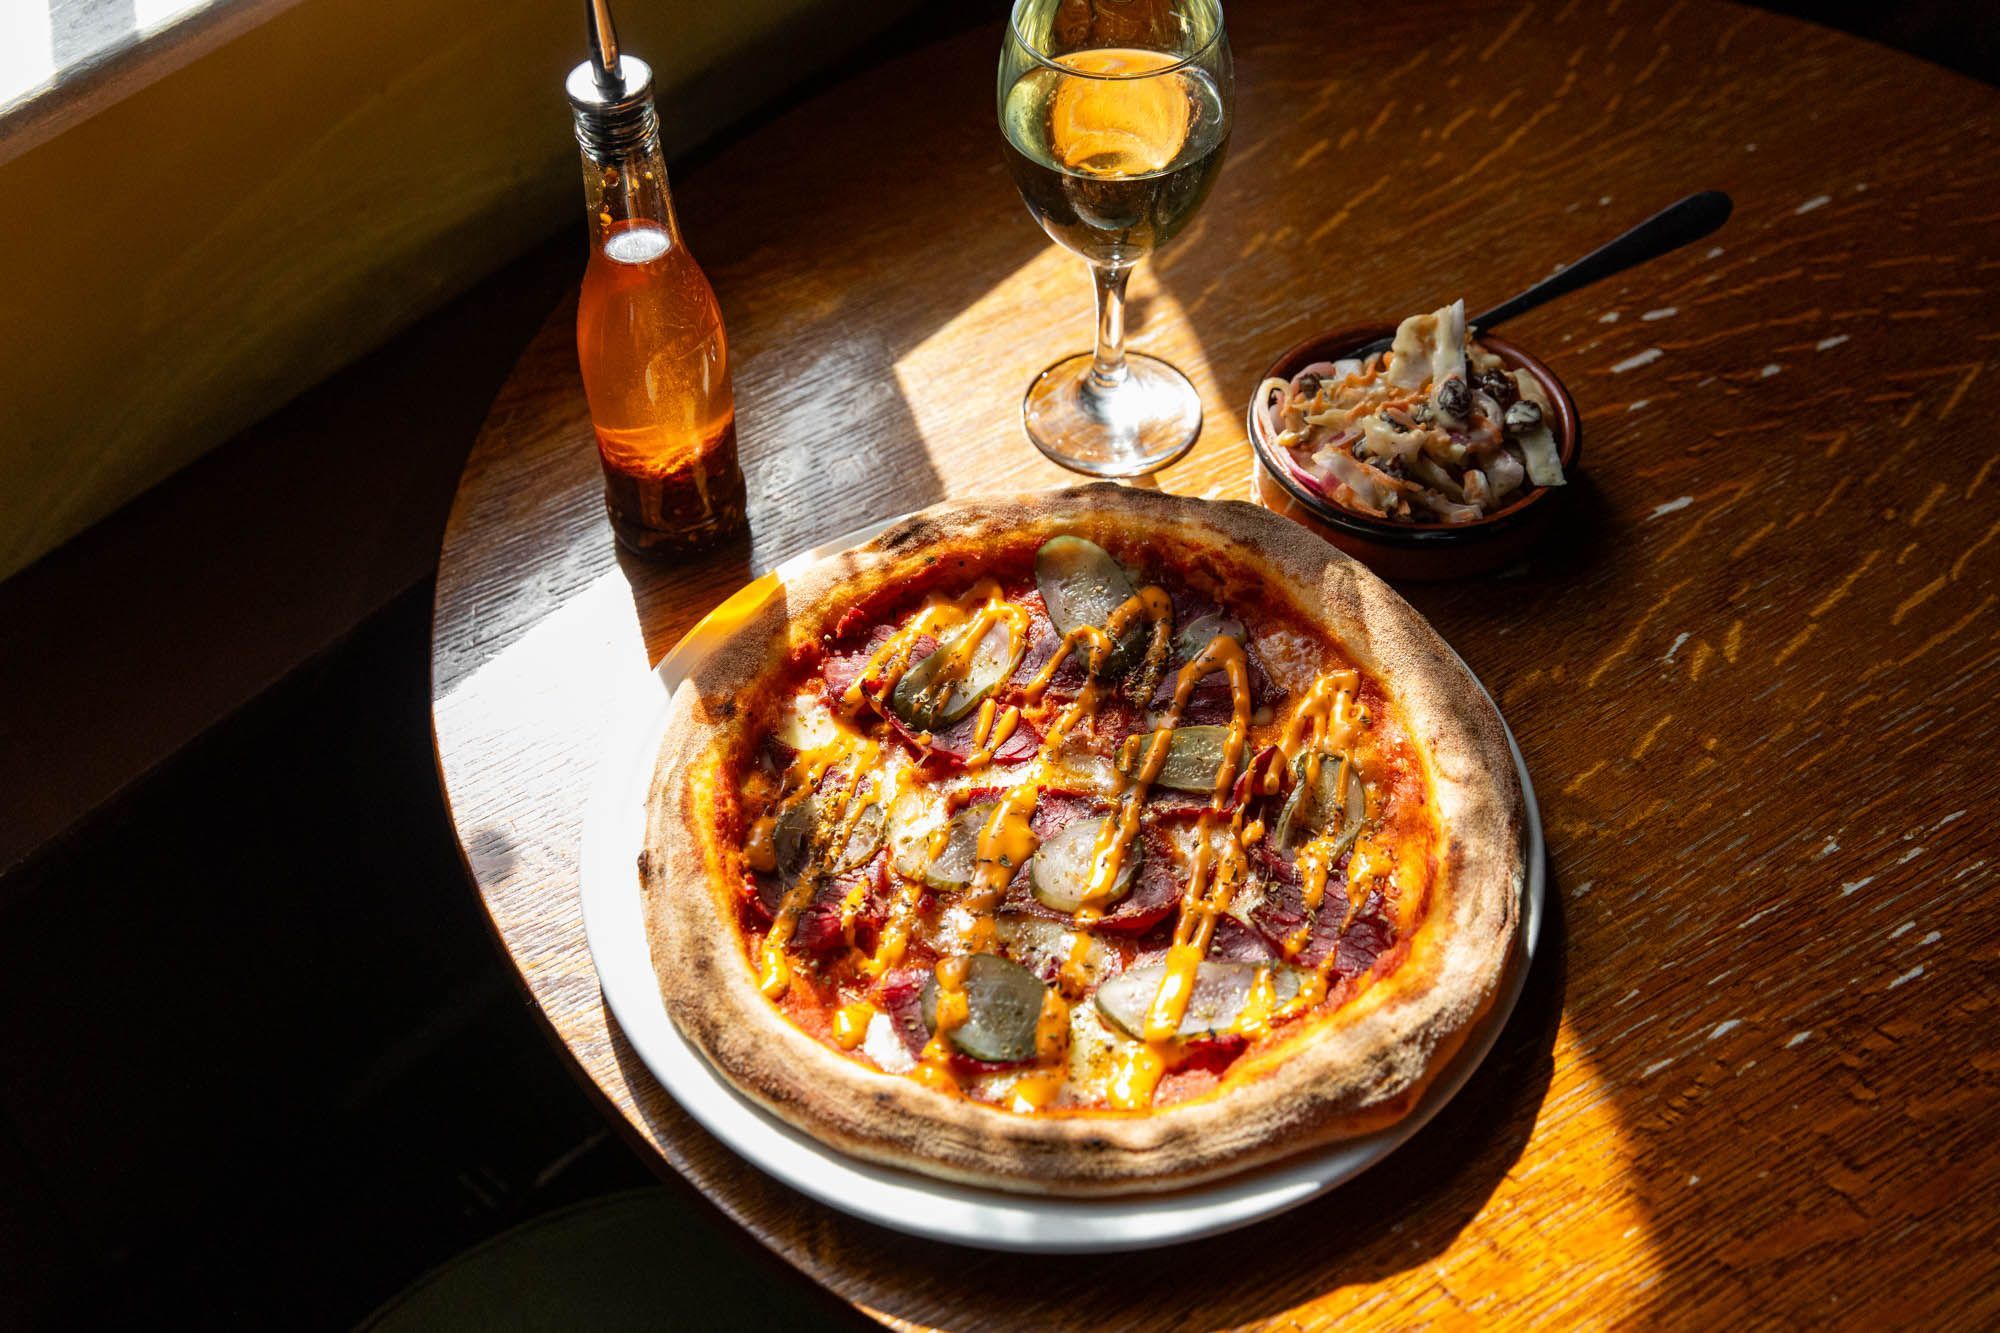 meat pizza served with glass of wine